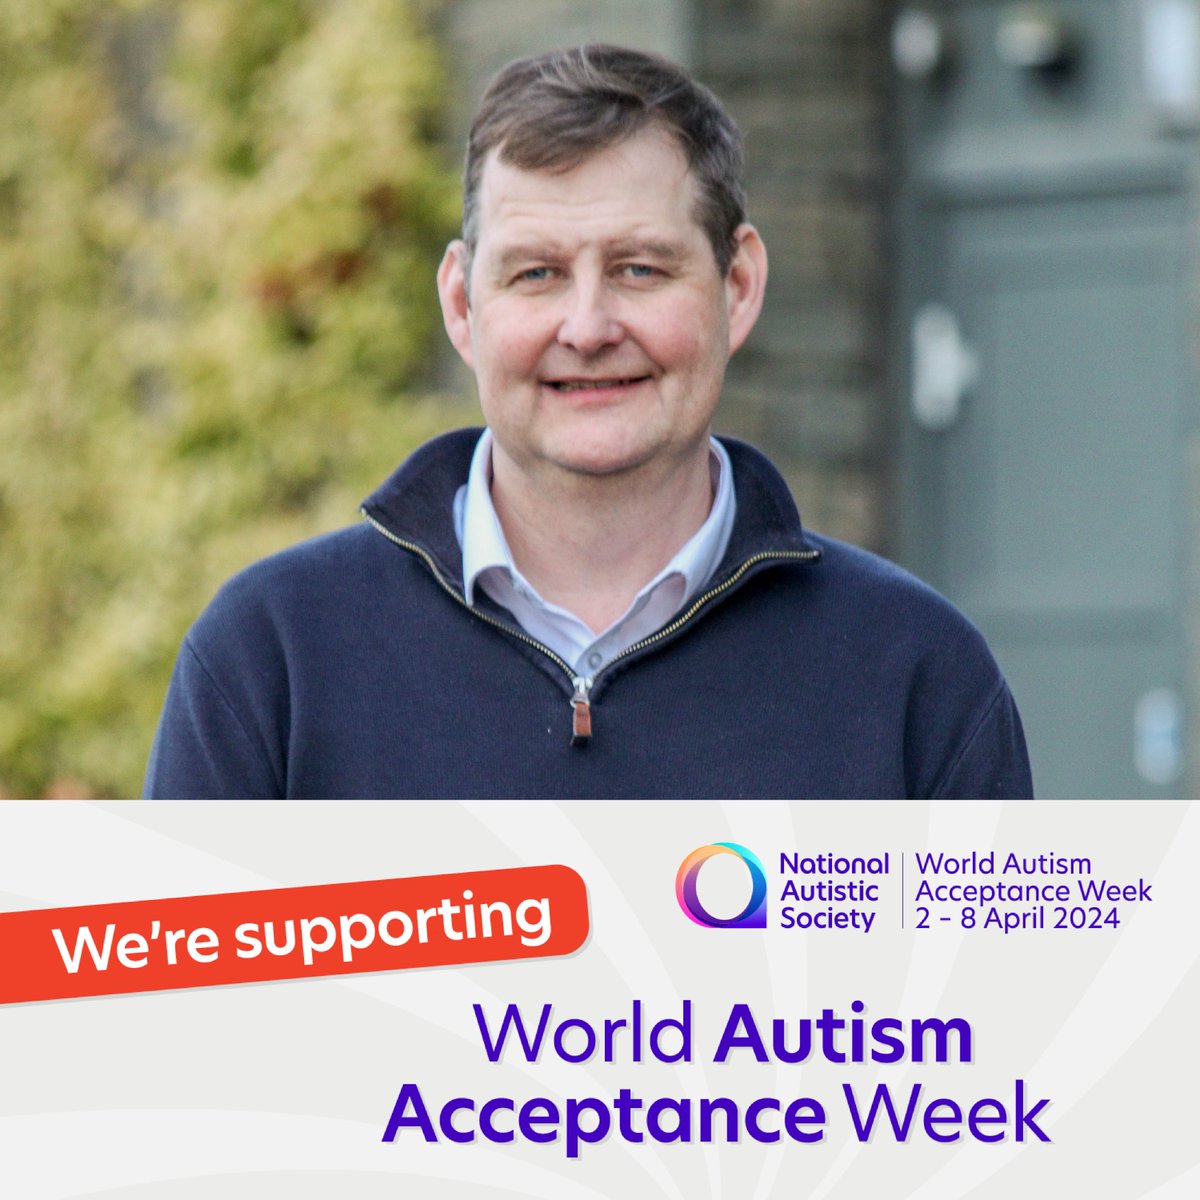 #WorldAutismAcceptanceWeek is a global campaign which runs from 2 to 8 April. To mark the start of the week, we share a message from our Director of Futures, John Booth. Continue reading: hillcrest.org.uk/a-message-from…